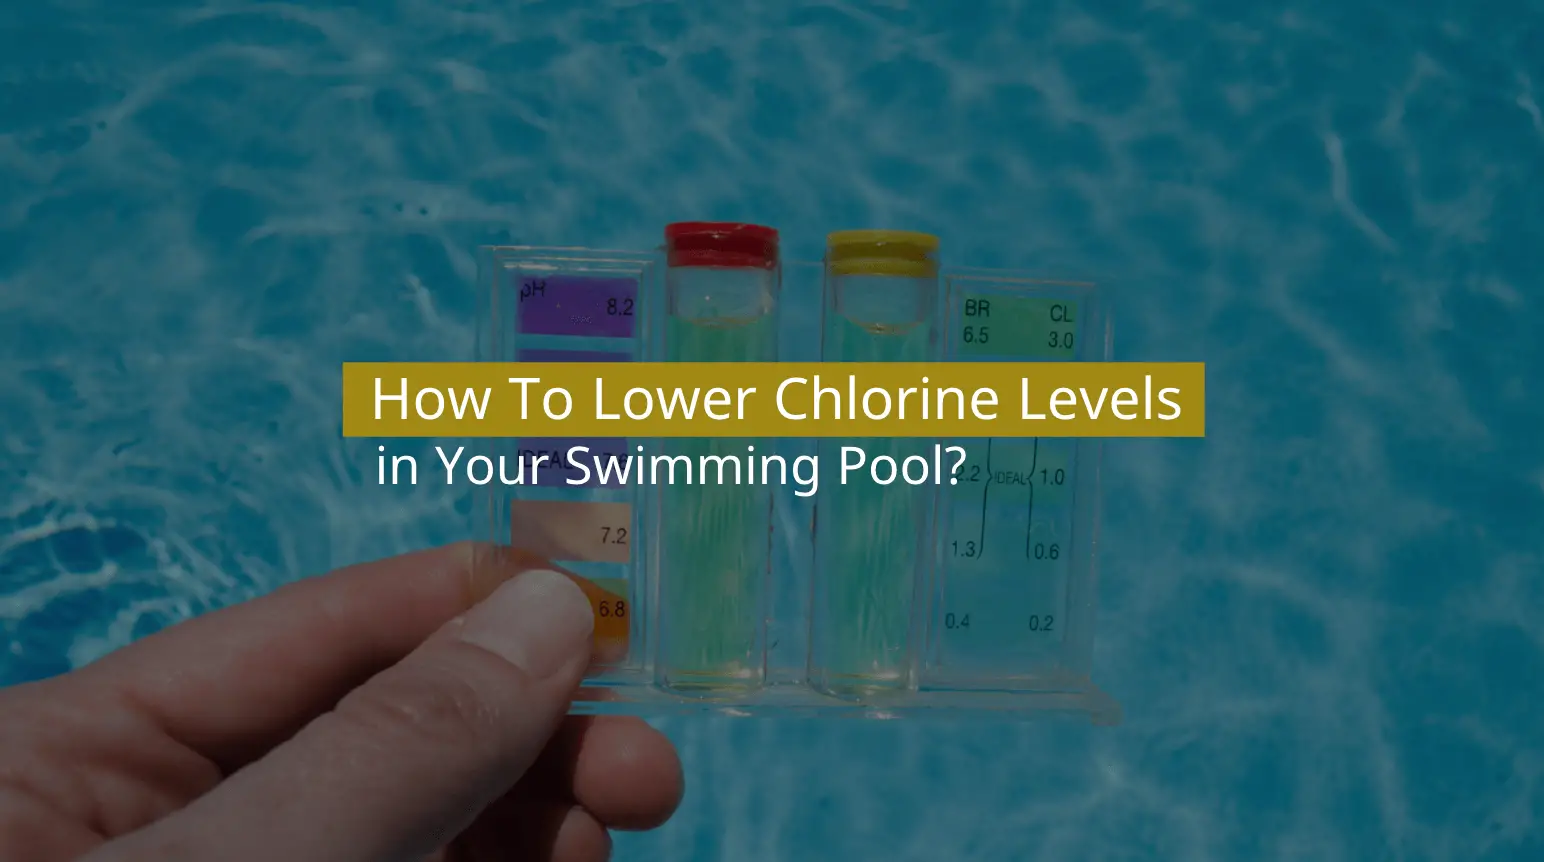 How To Lower Chlorine Levels in Your Swimming Pool?